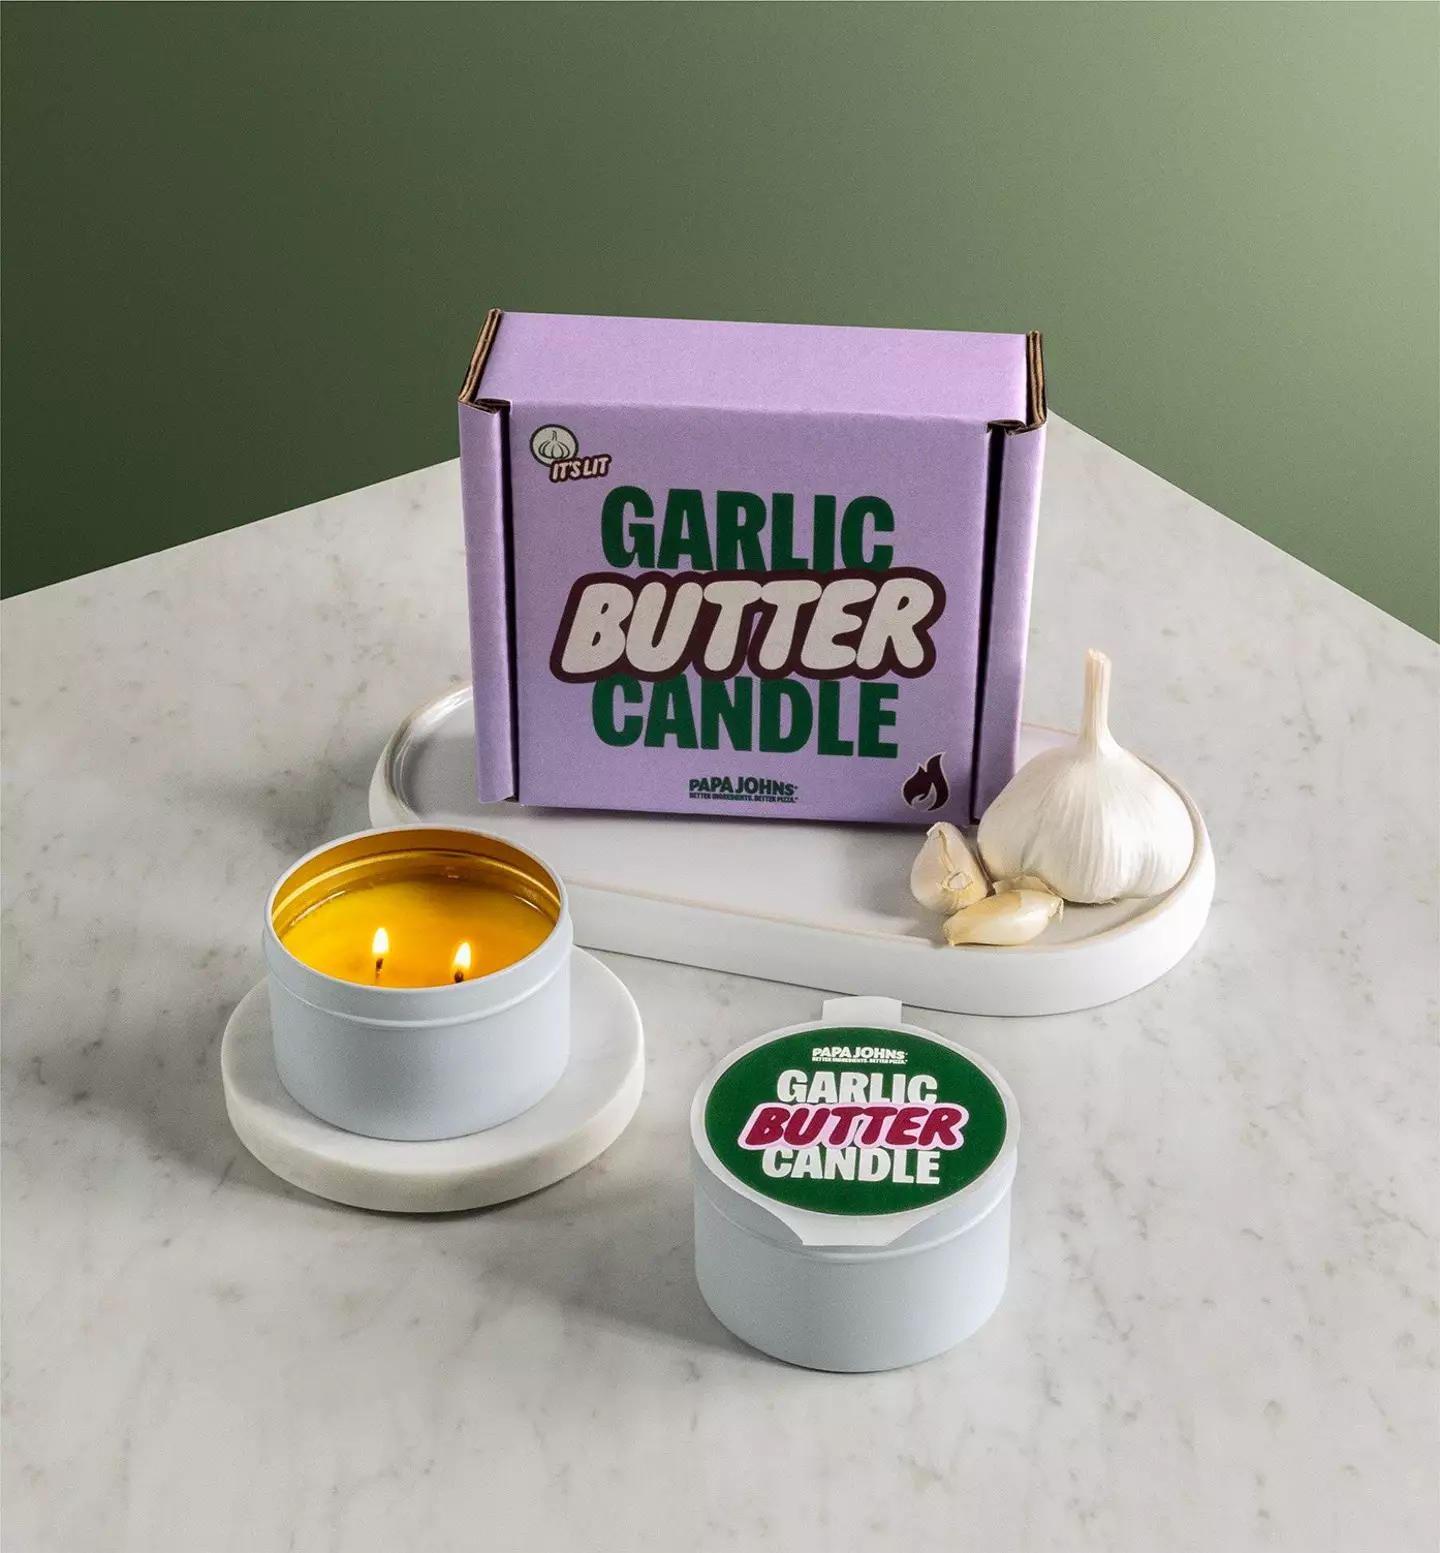 If you love garlic butter so much why wouldn't you want it in candle form? (Papa Johns)